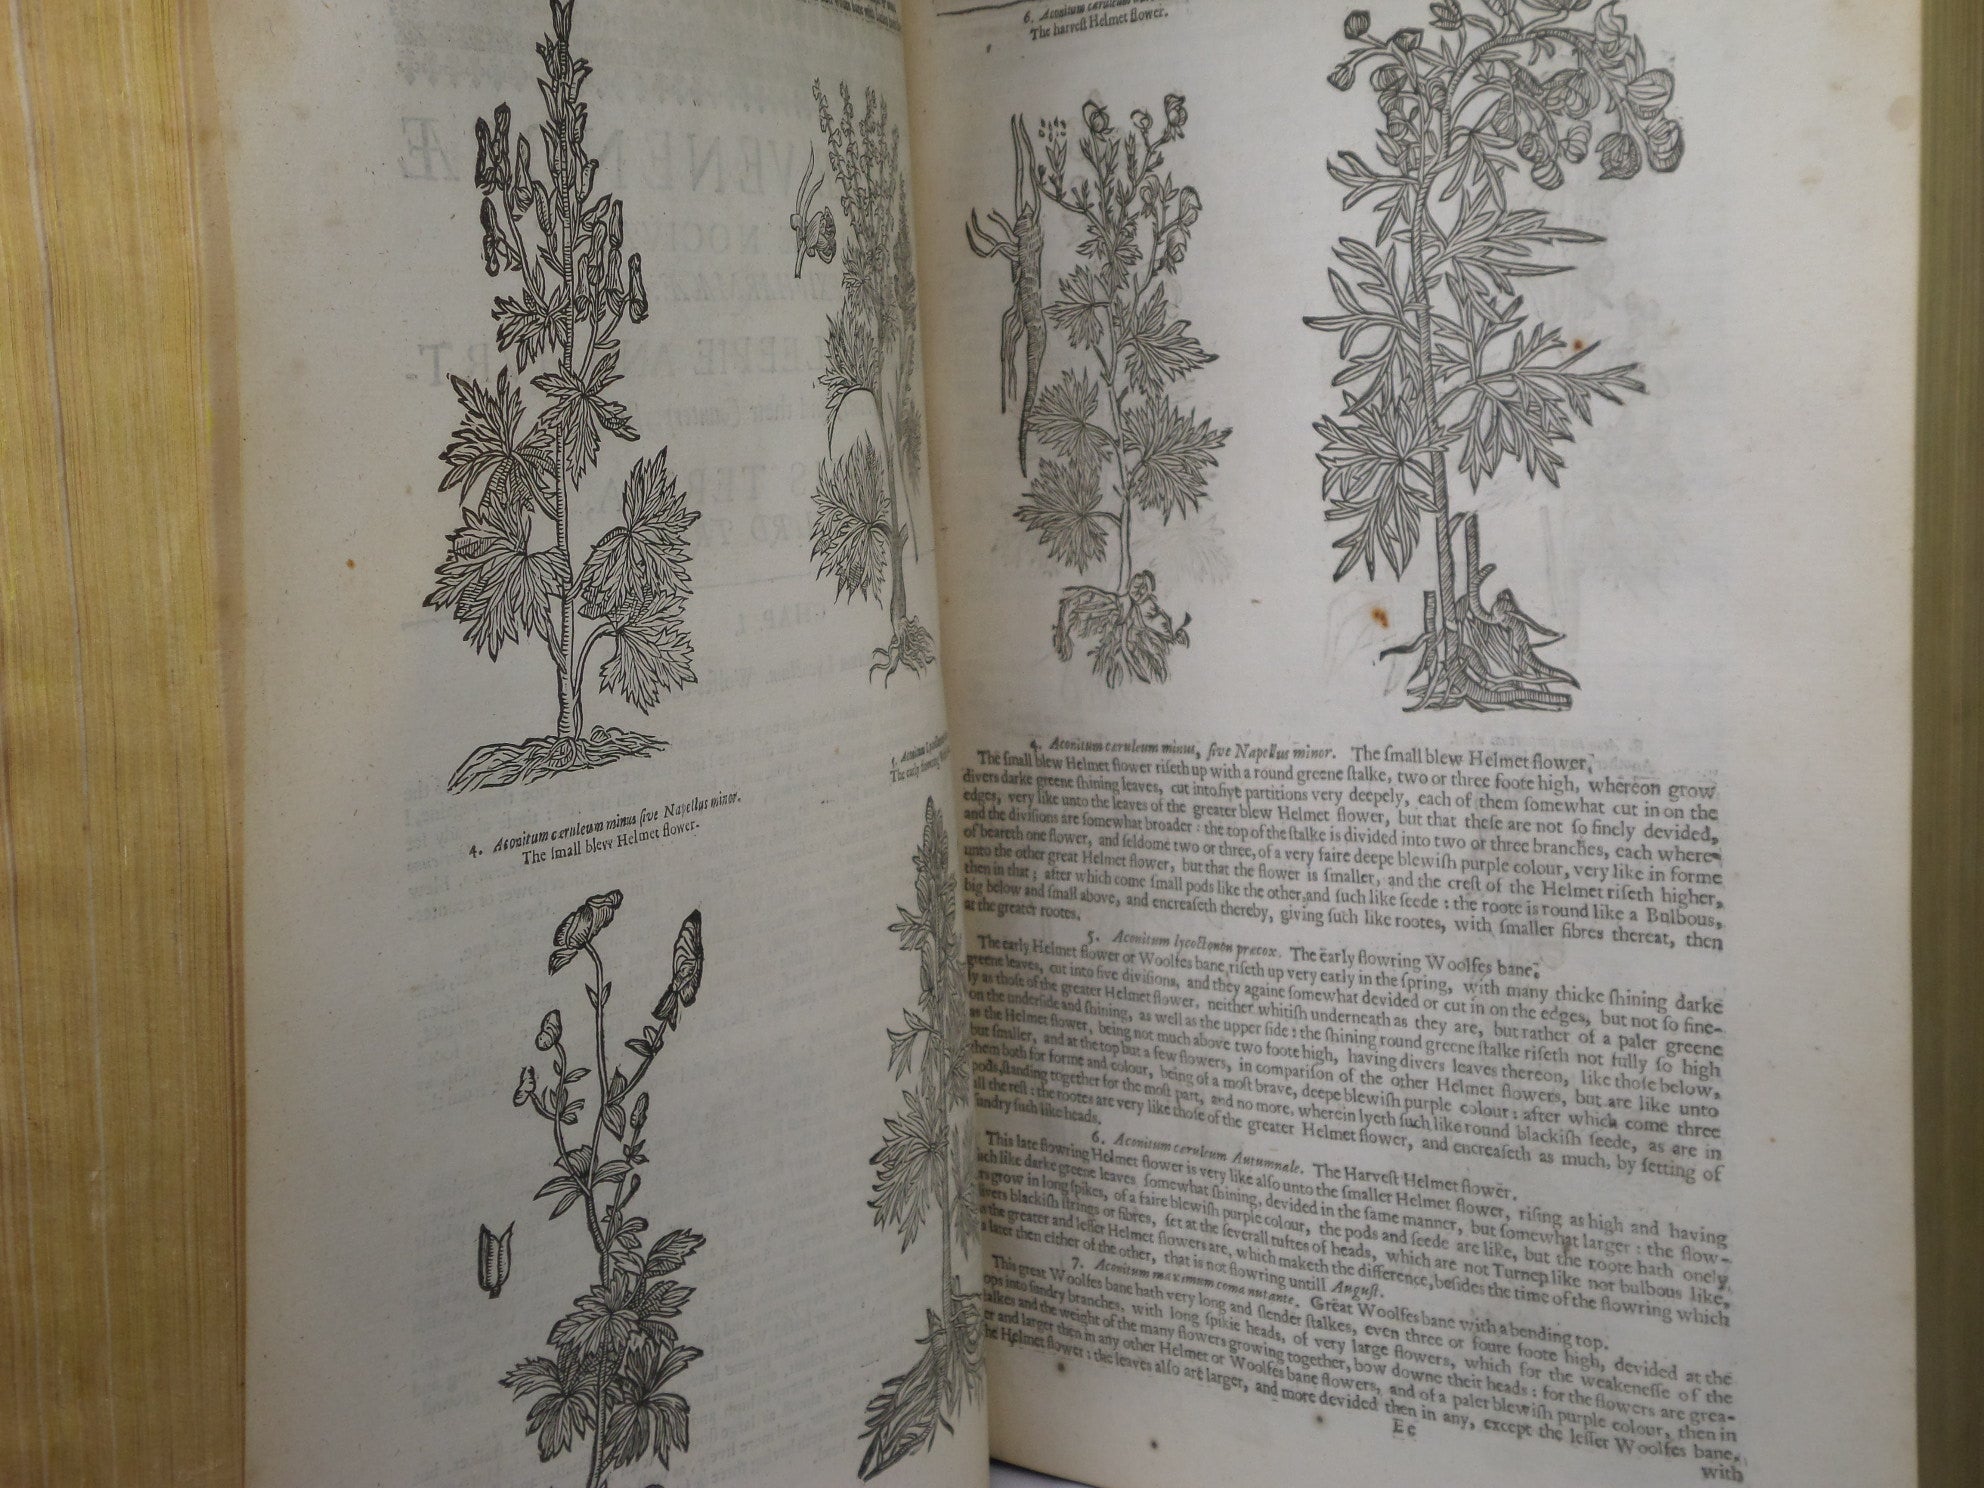 THEATRUM BOTANICUM: THE THEATER OF PLANTS BY JOHN PARKINSON 1640 FIRST EDITION